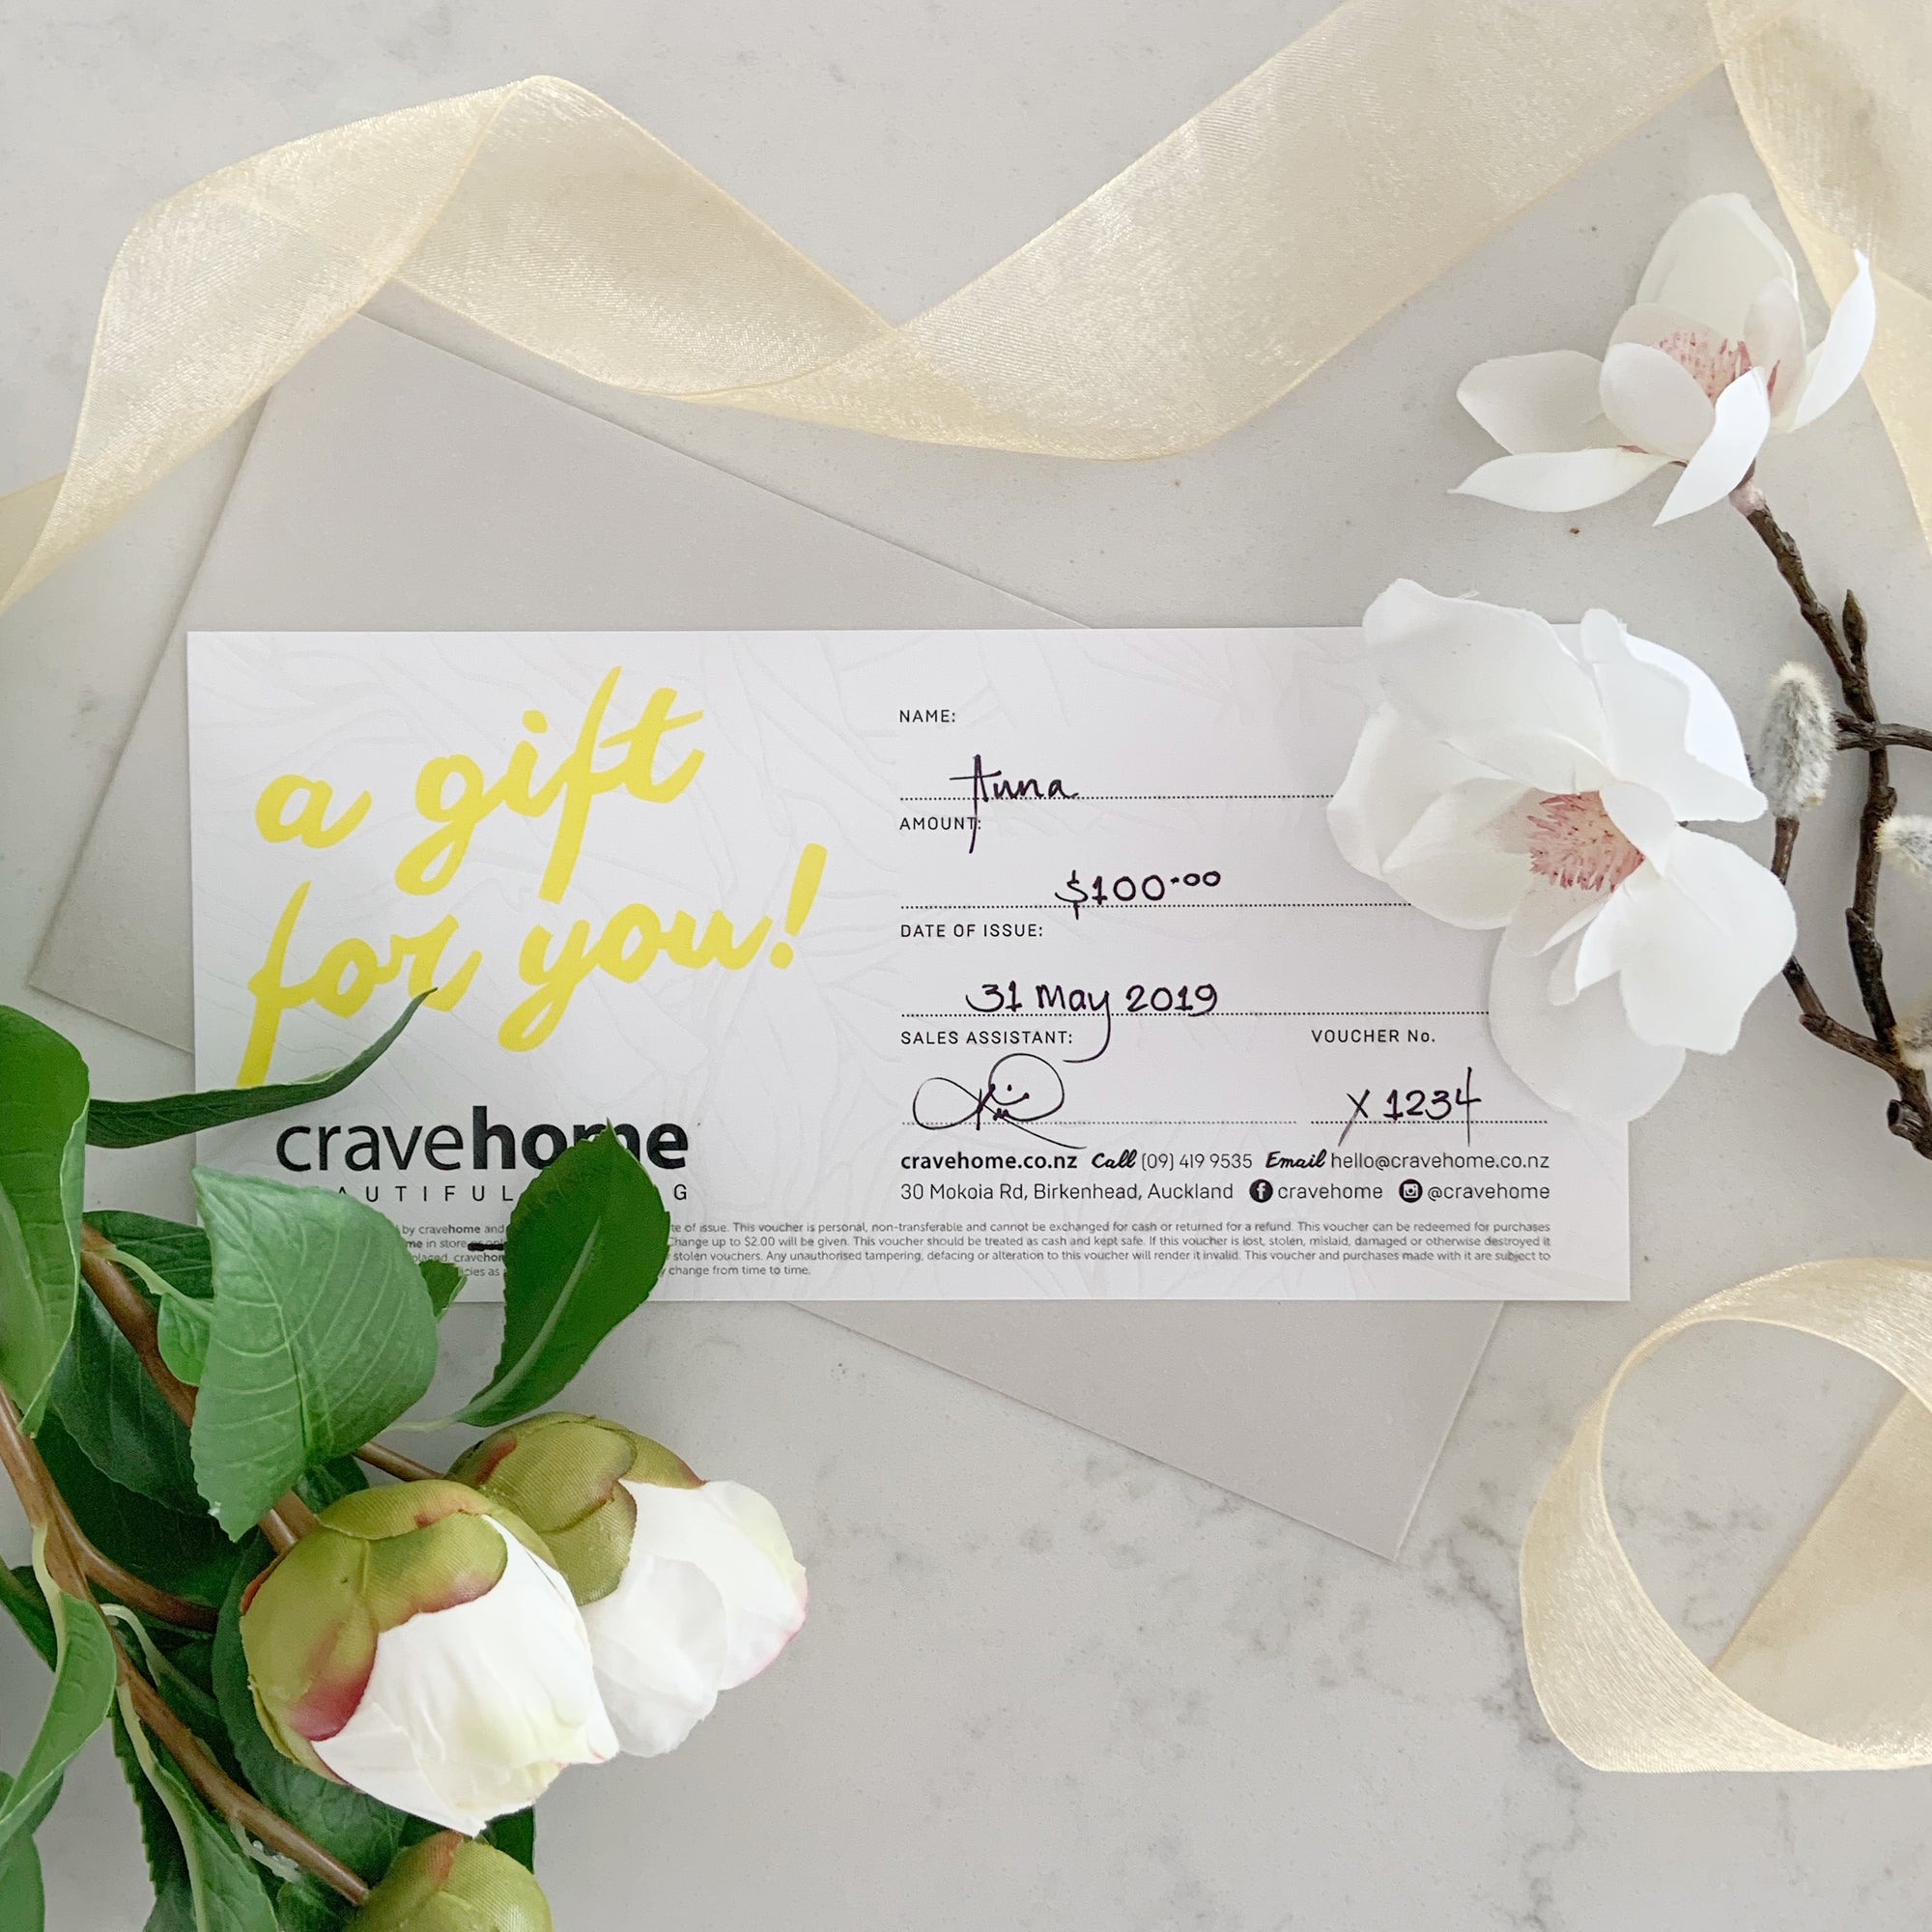 cravehome $100 Gift Card